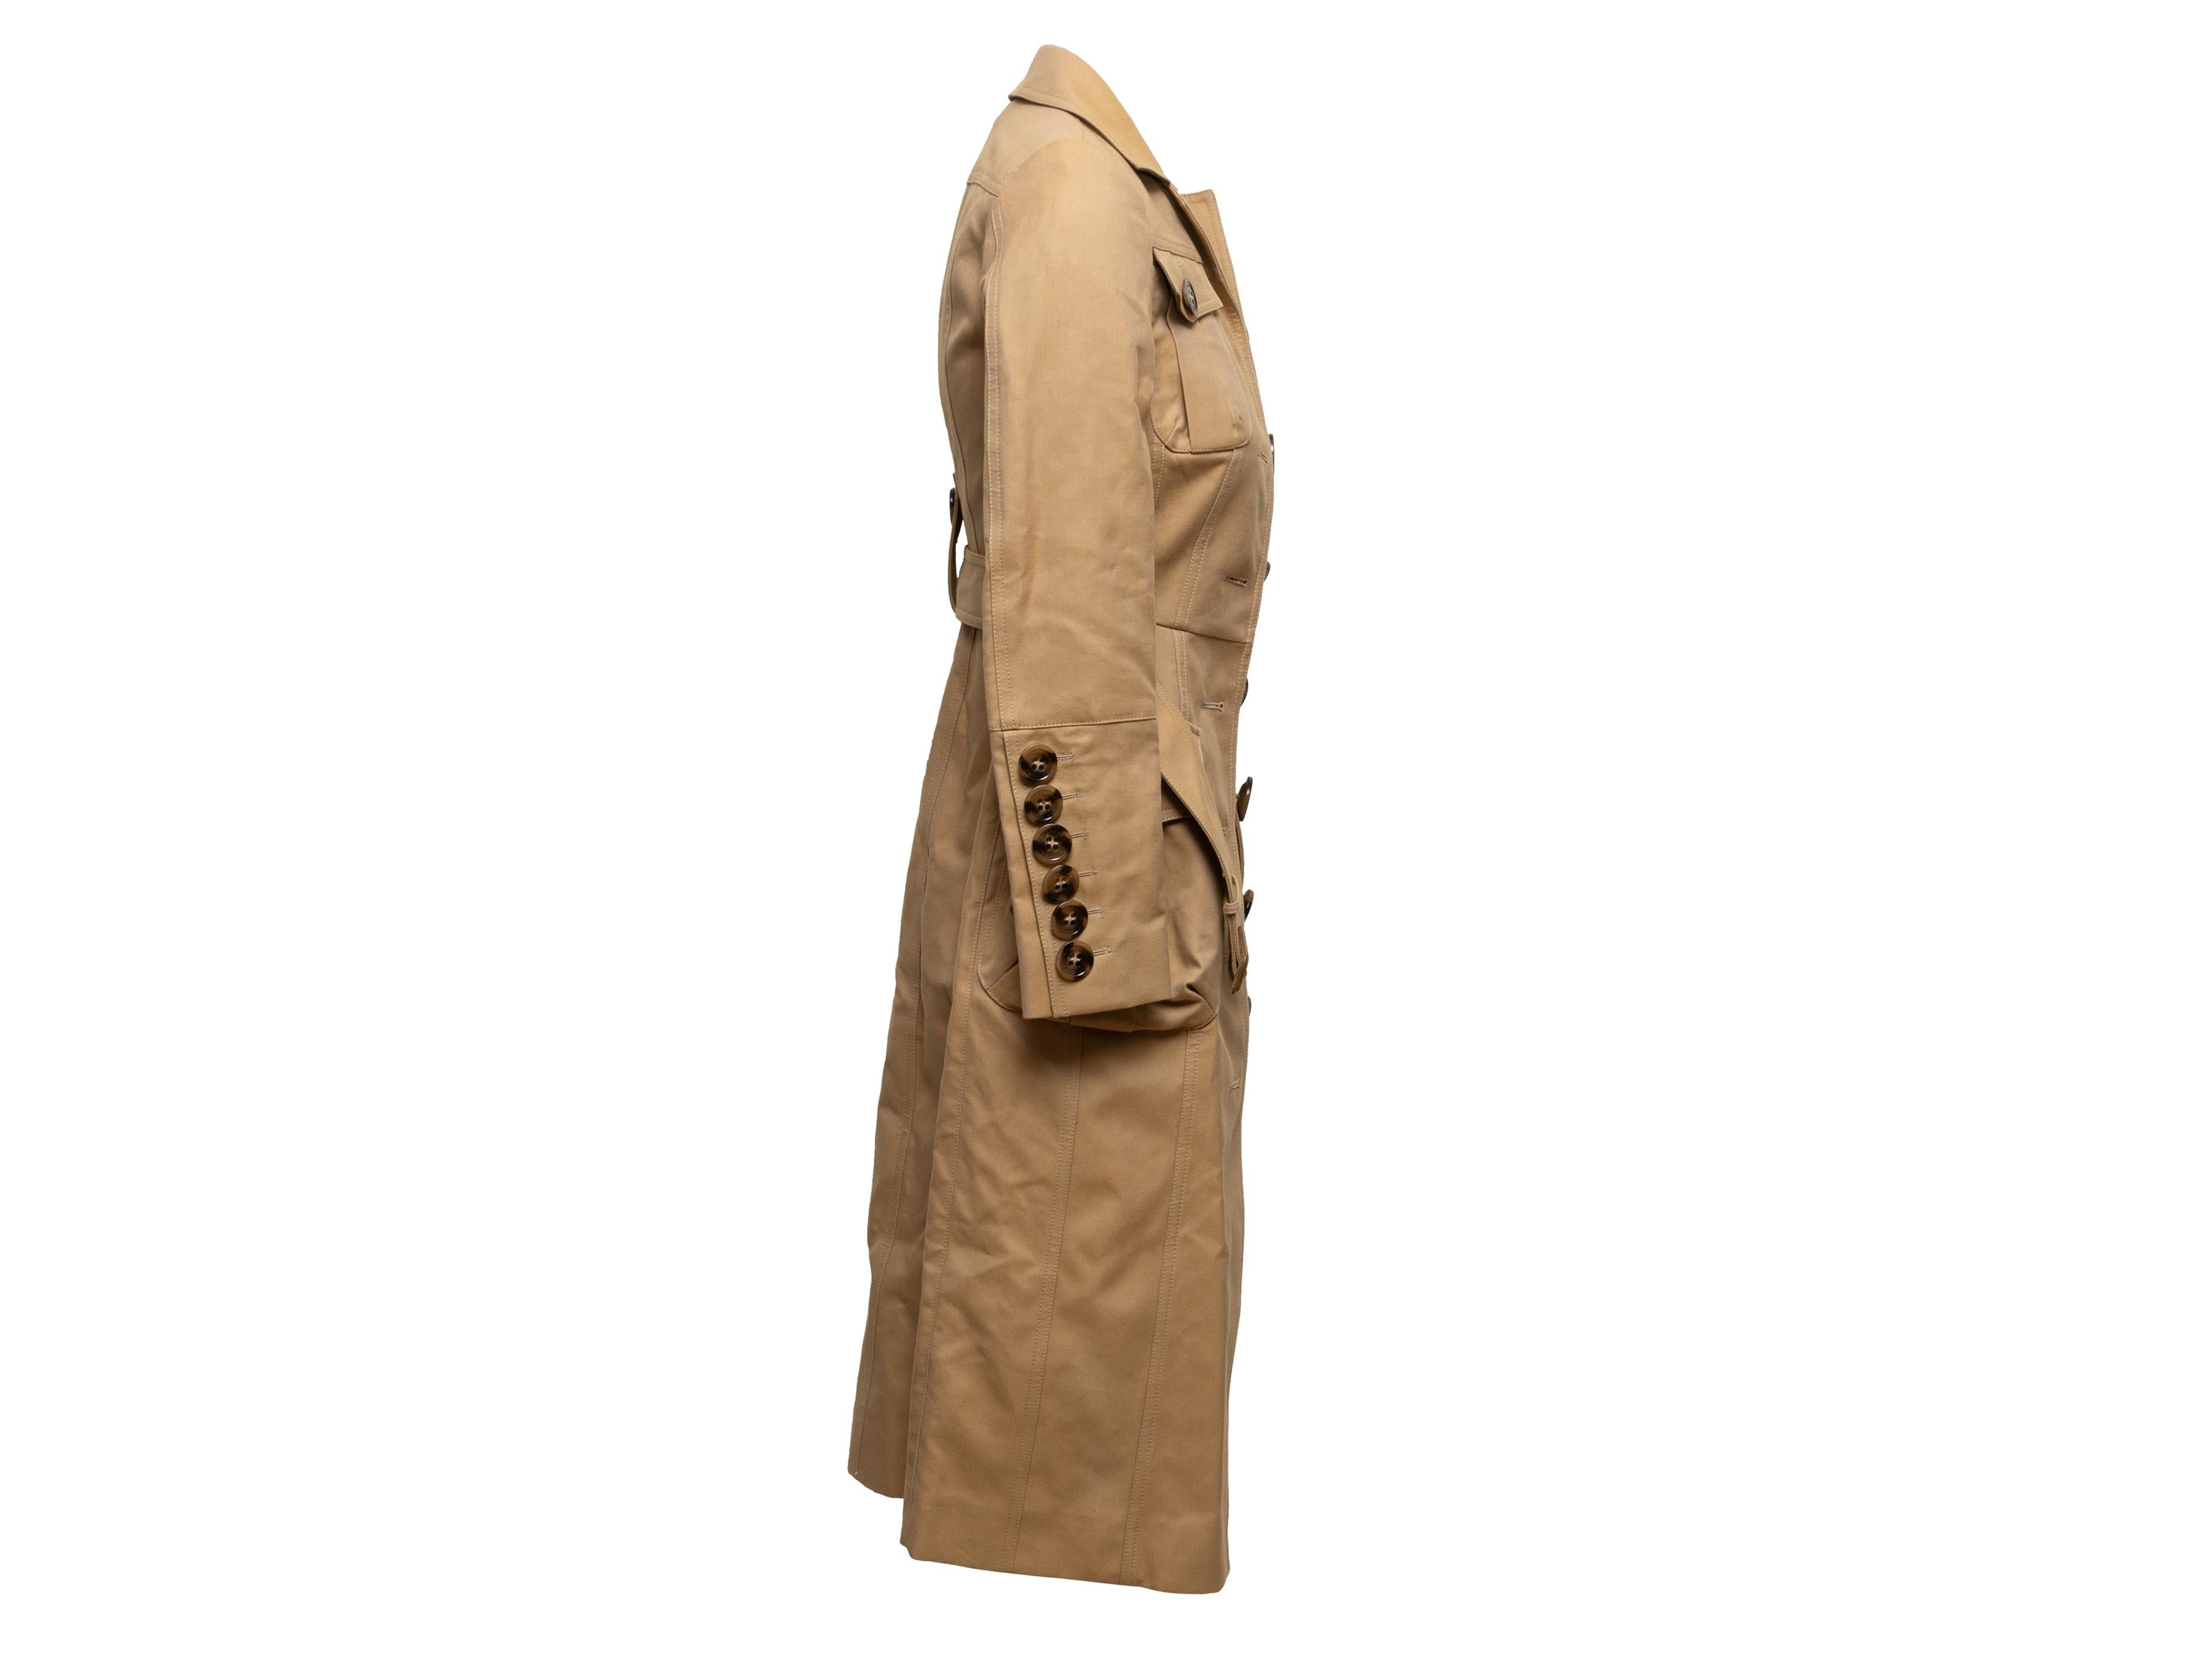 Tan belted trench coat by Burberry Prorsum. Pointed collar. Four pockets. Oversized button closures at front. 30